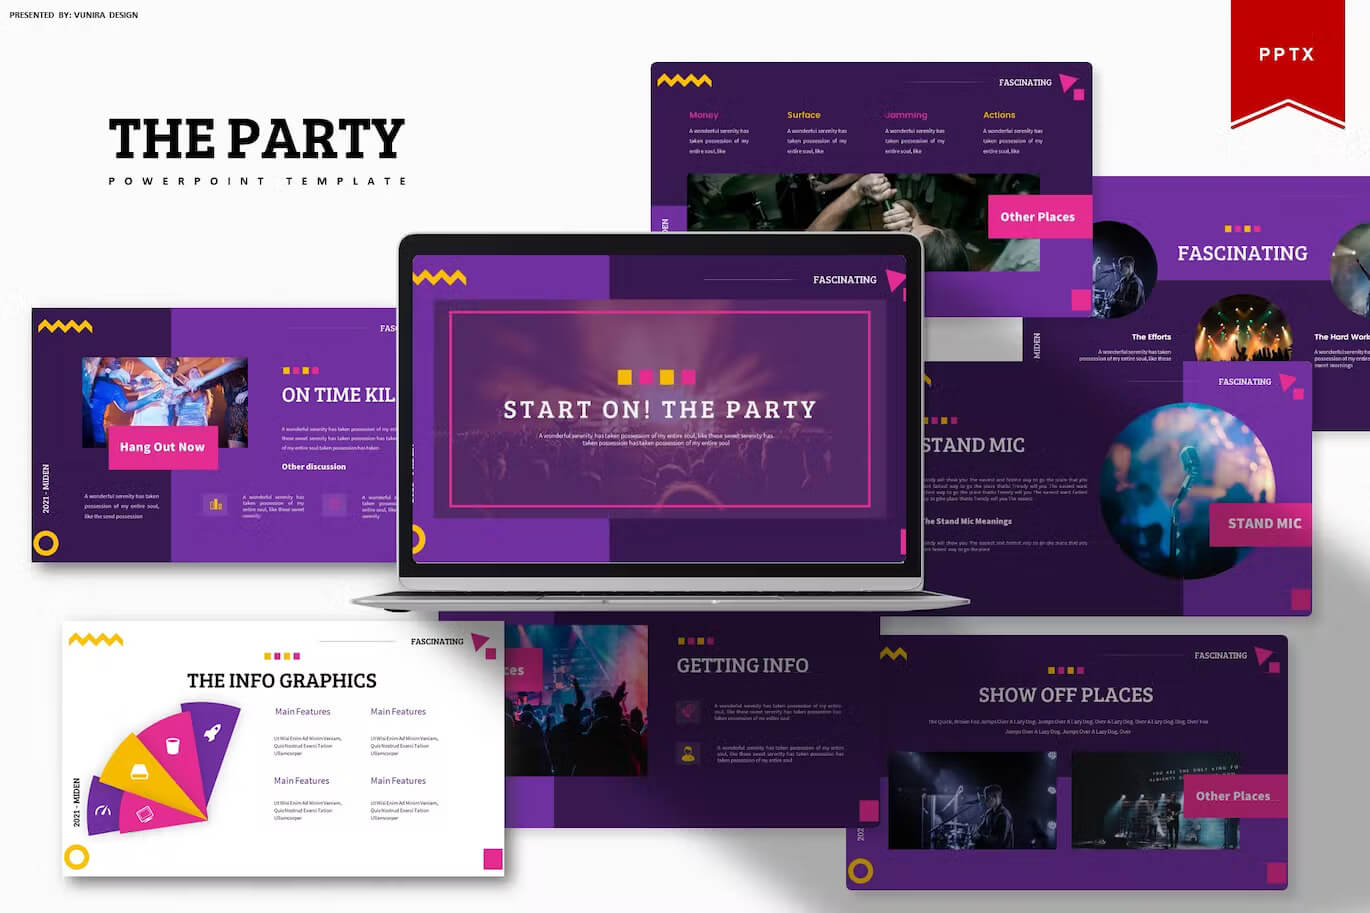 The vocalist of the party powerpoint template.